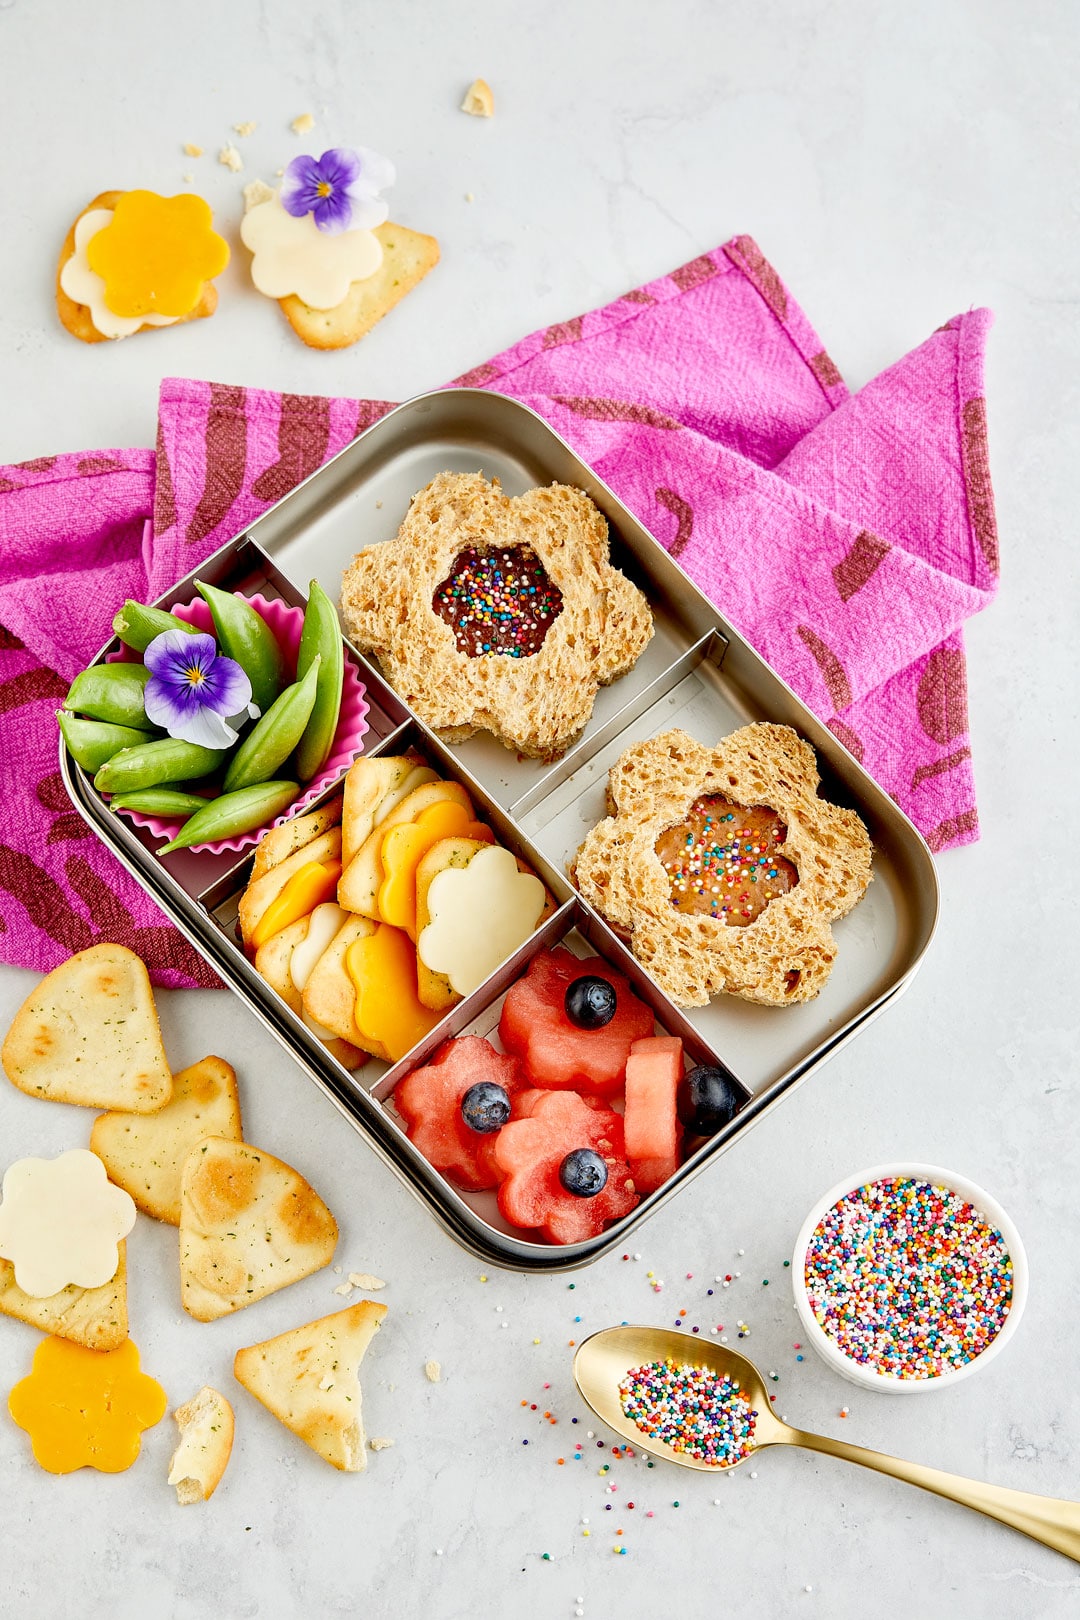 Bento Box Lunch Almond Butter and Jelly Sandwiches